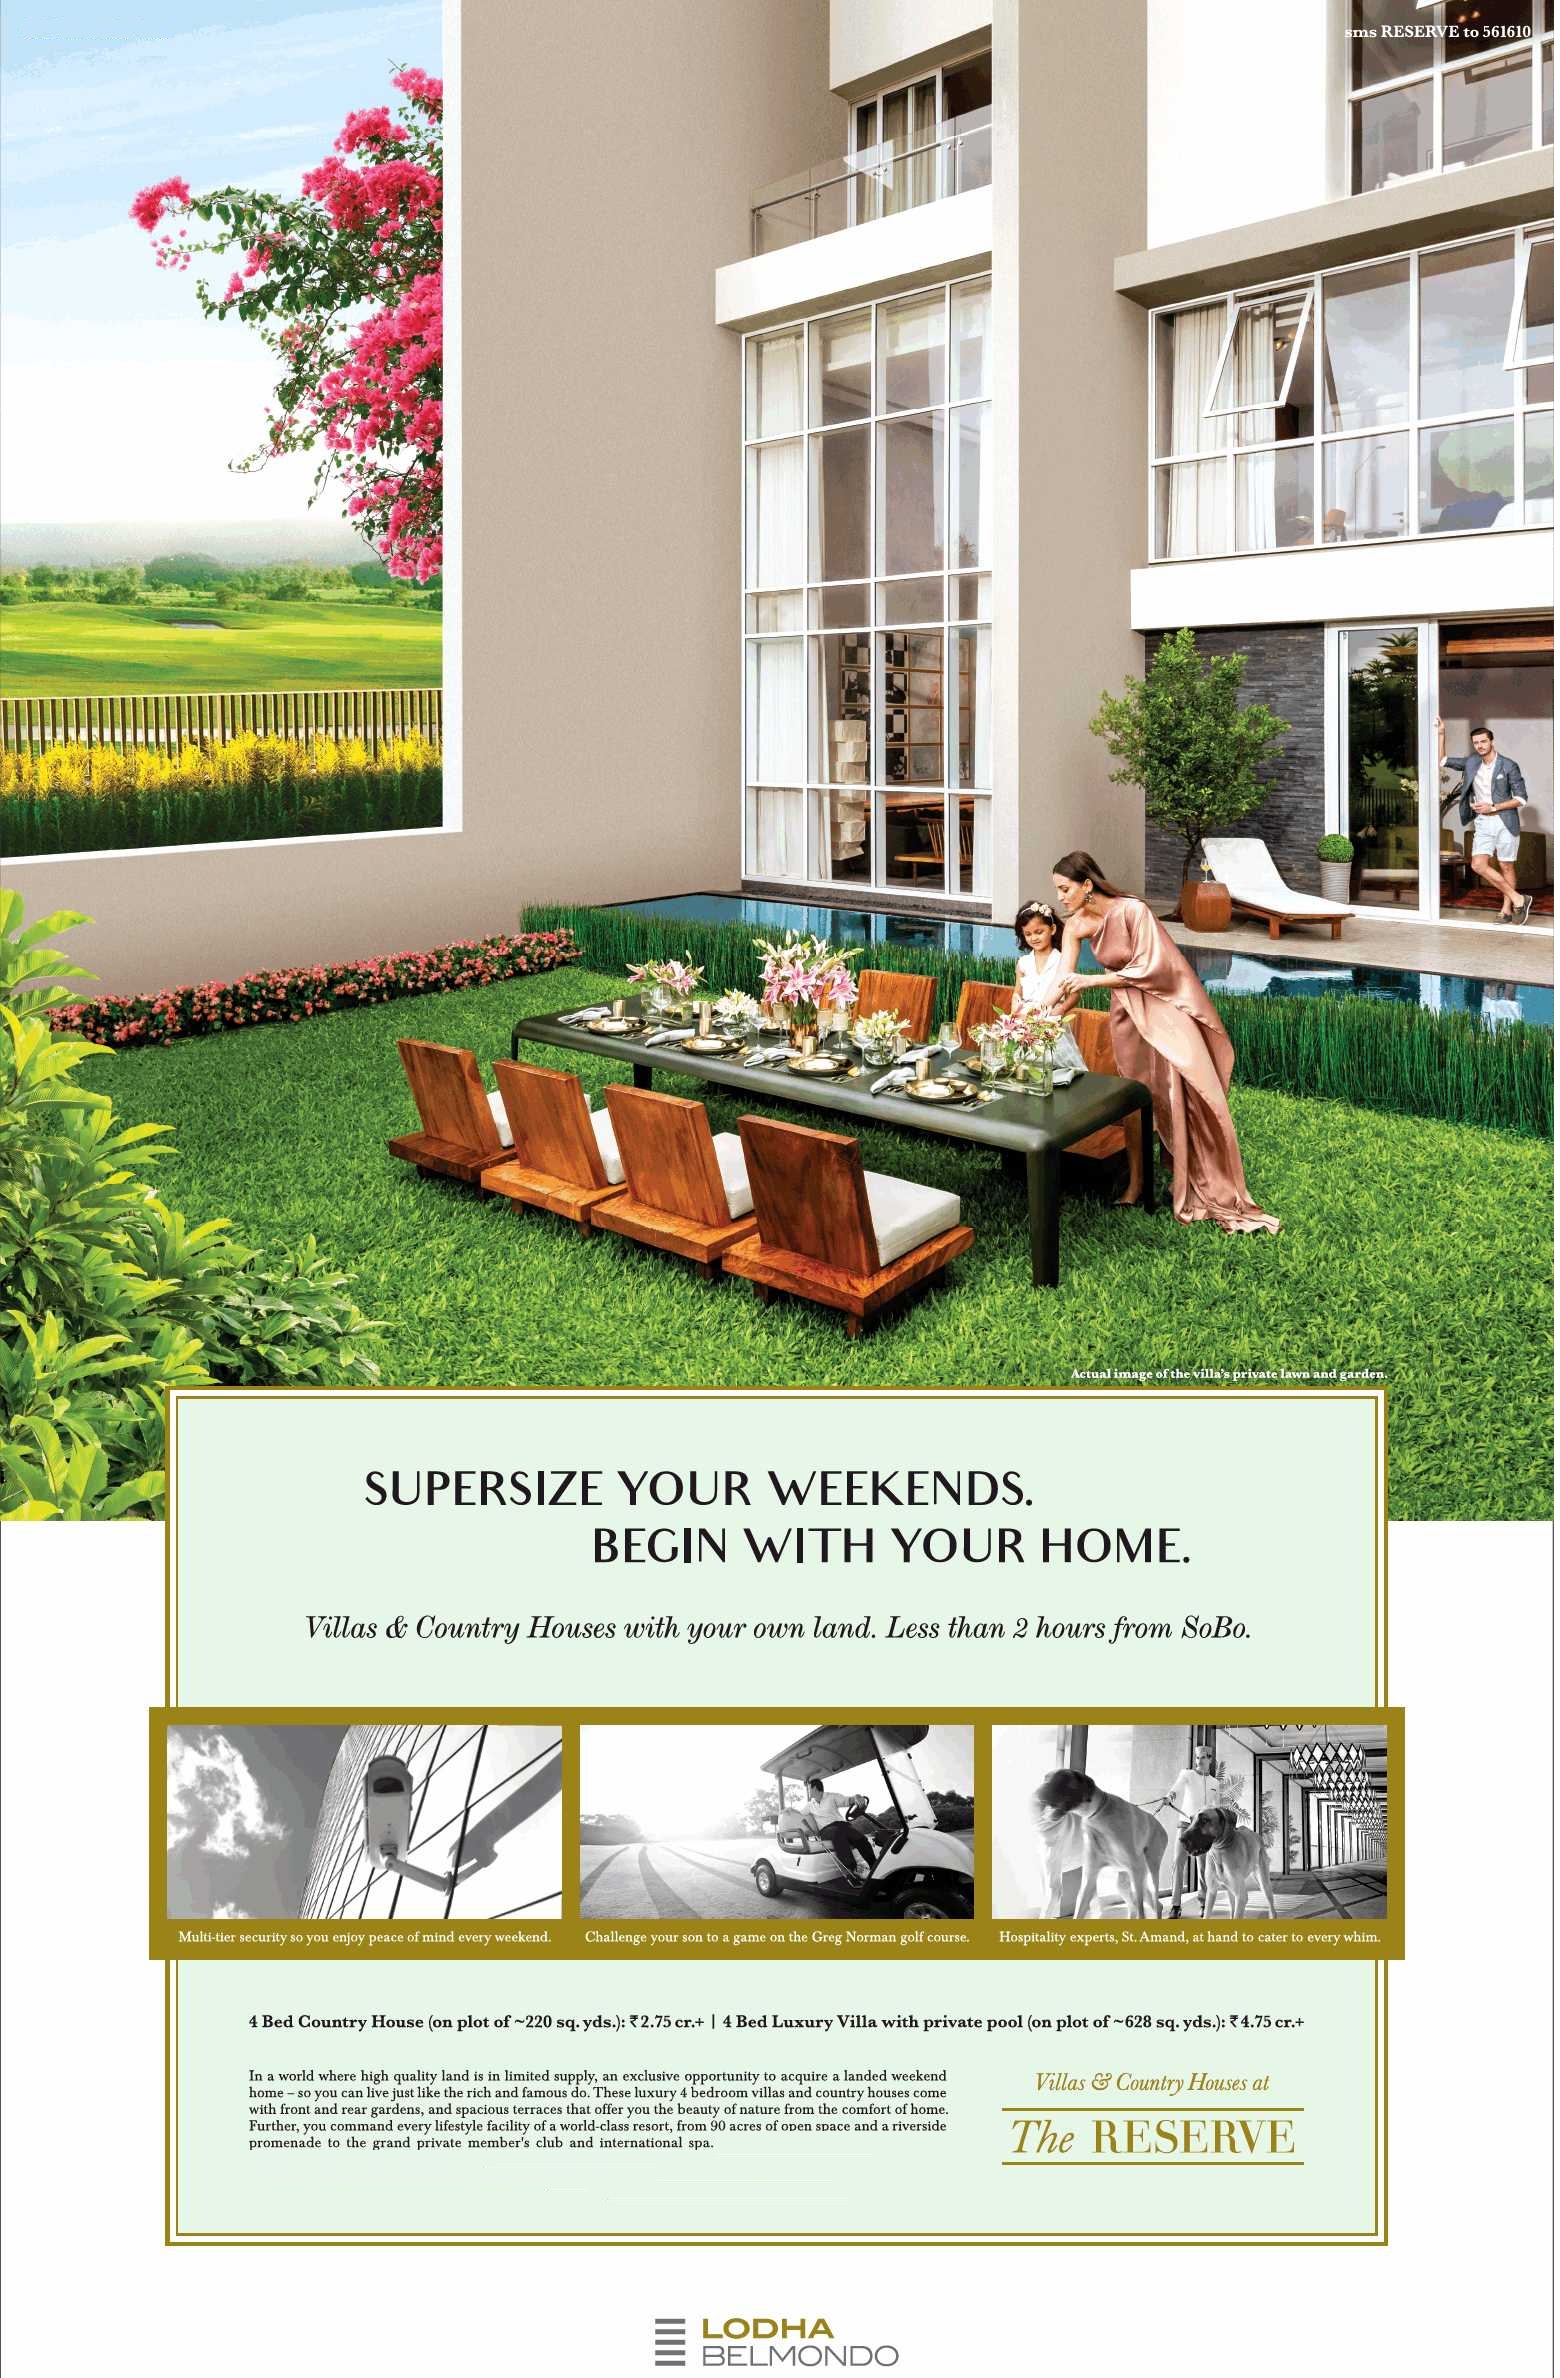 Book villa & country house with your own land at Lodha Belmondo in Pune Update